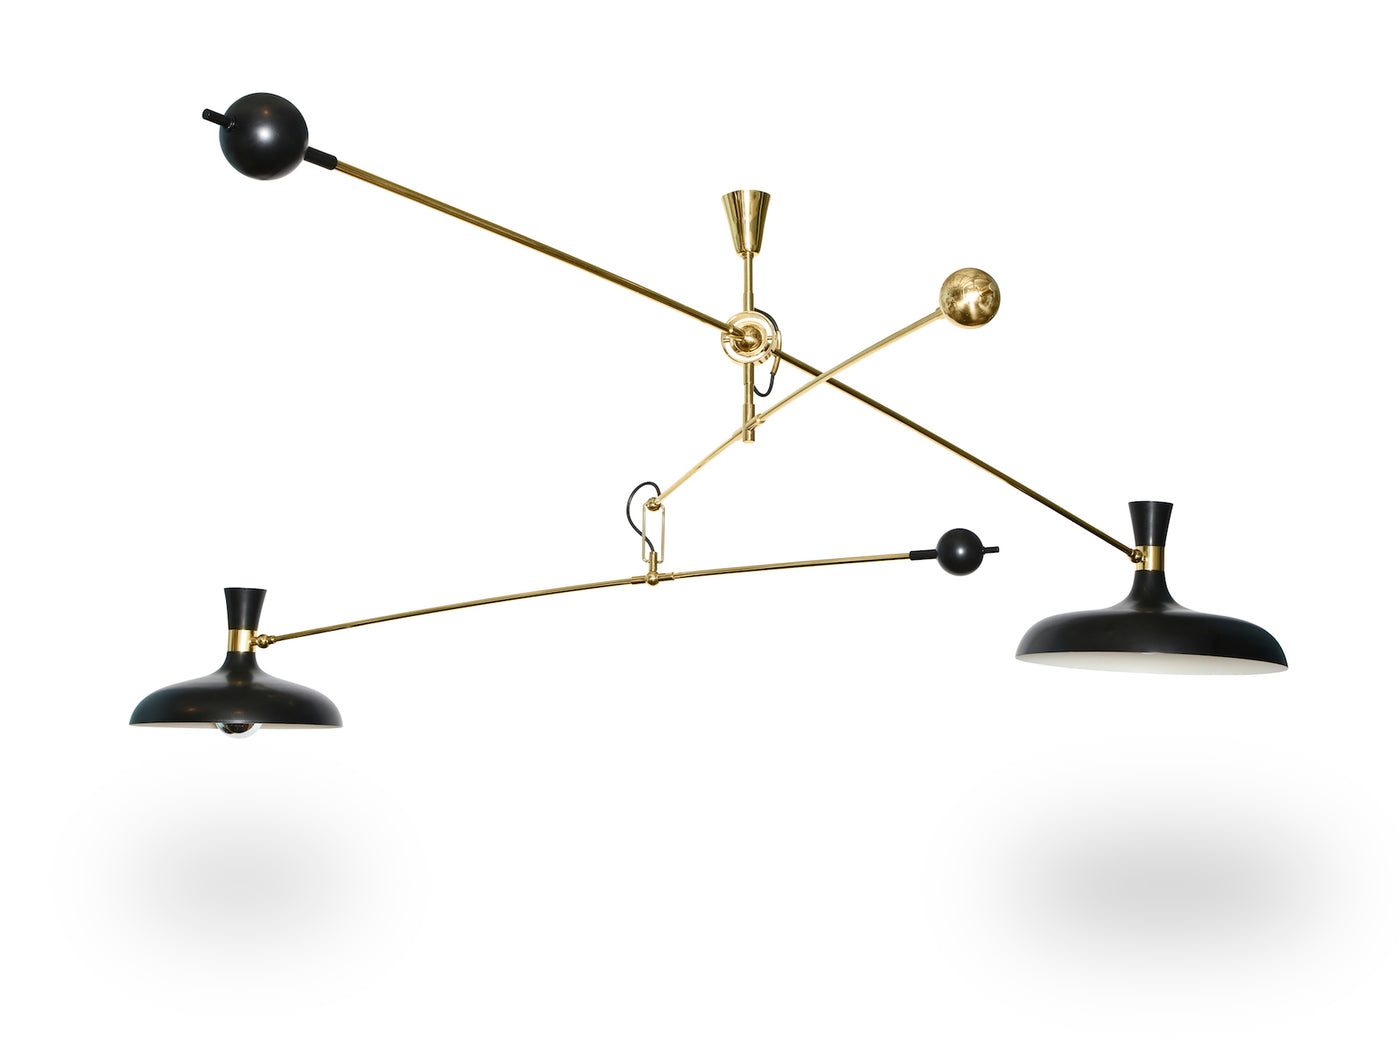 Studio-Made 2-Light "Mobile" Fixture by Fedele Papagni